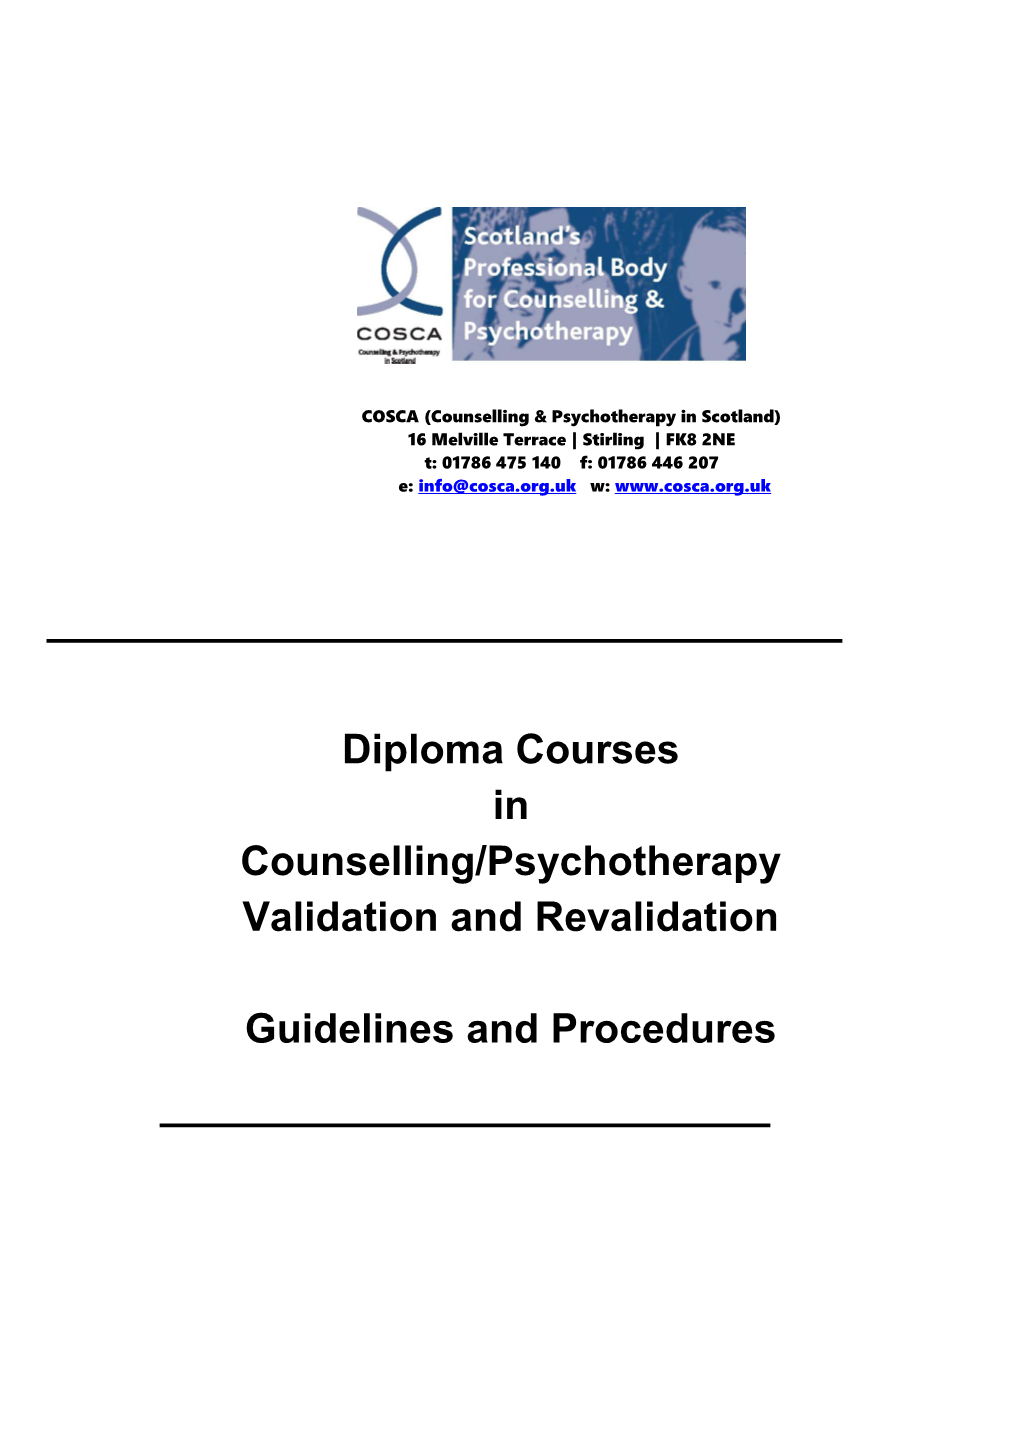 Diploma Courses in Counselling/Psychotherapy